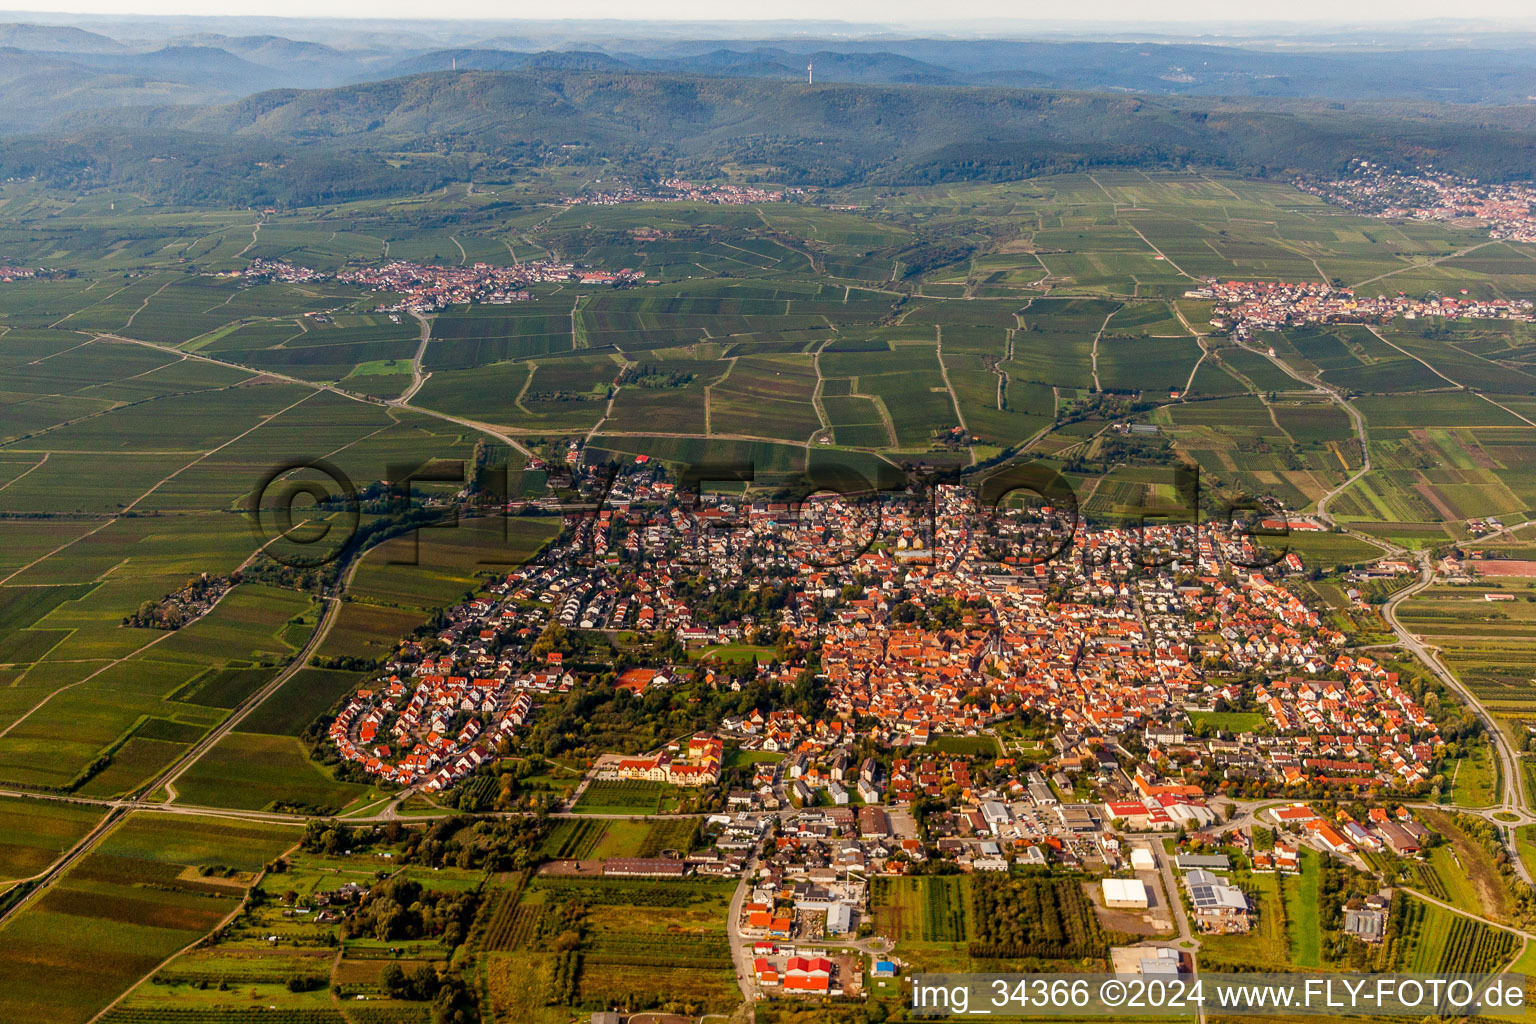 Village - view on the edge of agricultural fields and farmland in Freinsheim in the state Rhineland-Palatinate, Germany